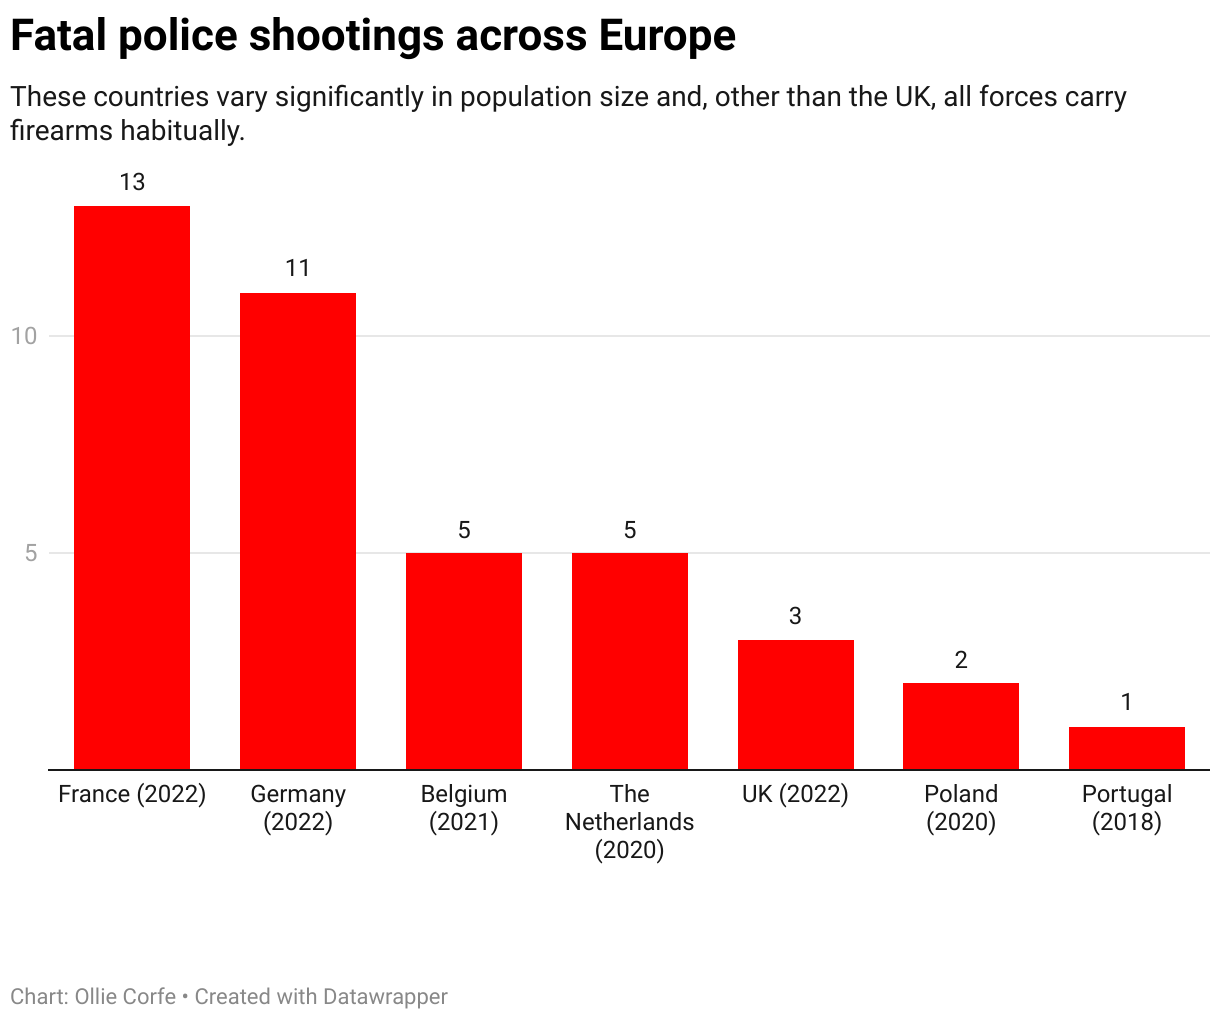 Number of police shootings per country.